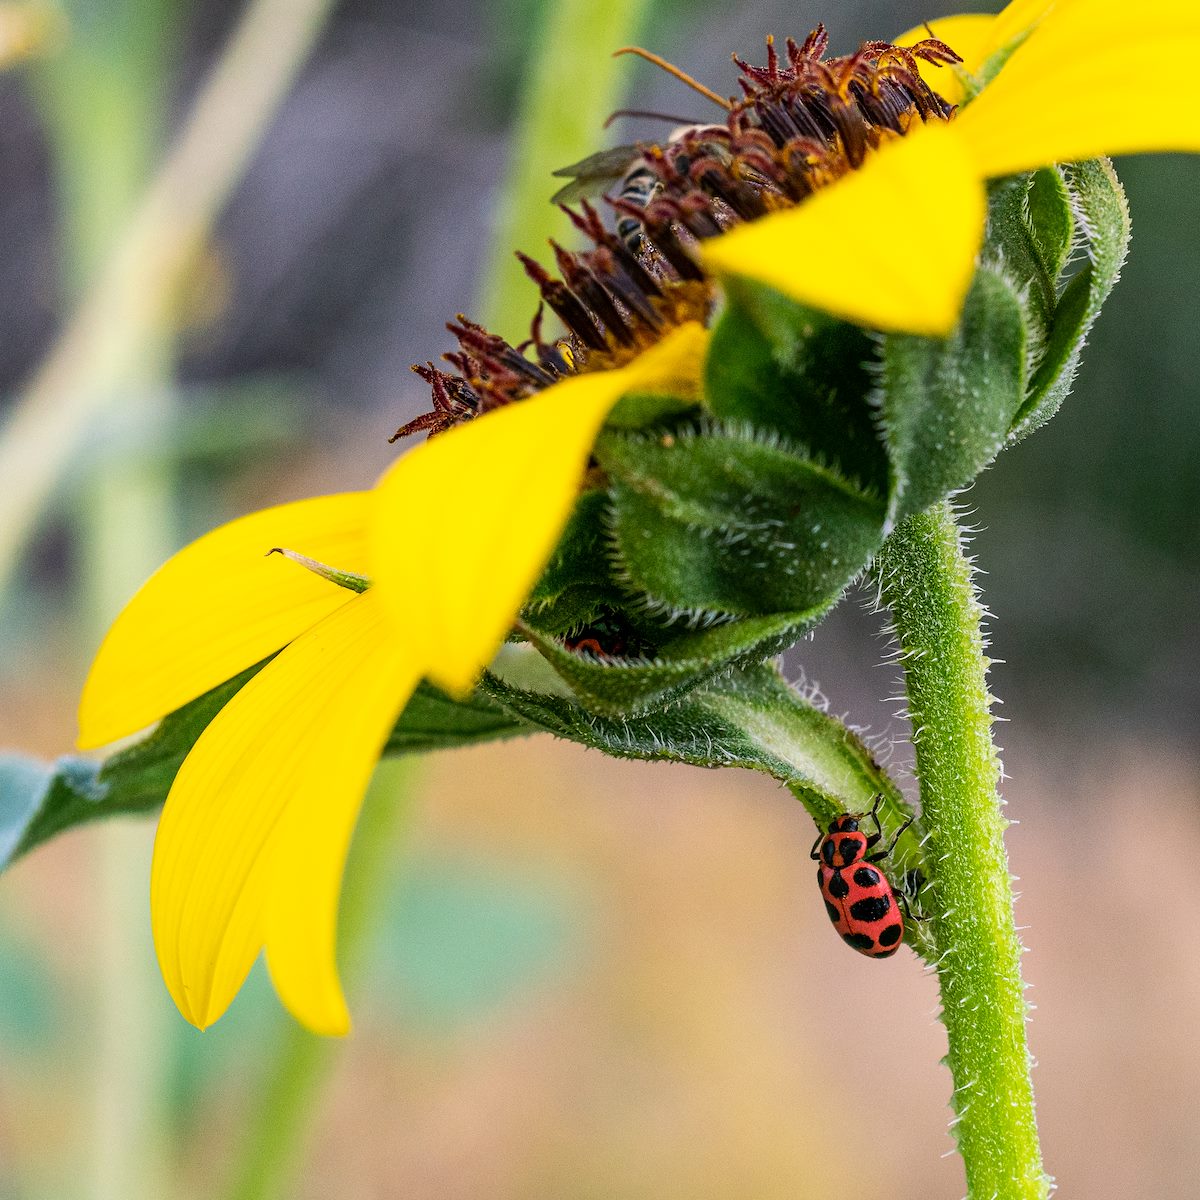 2020 June 12 Spotted Lady Beetle on a Common Sunflower off Sasco Road